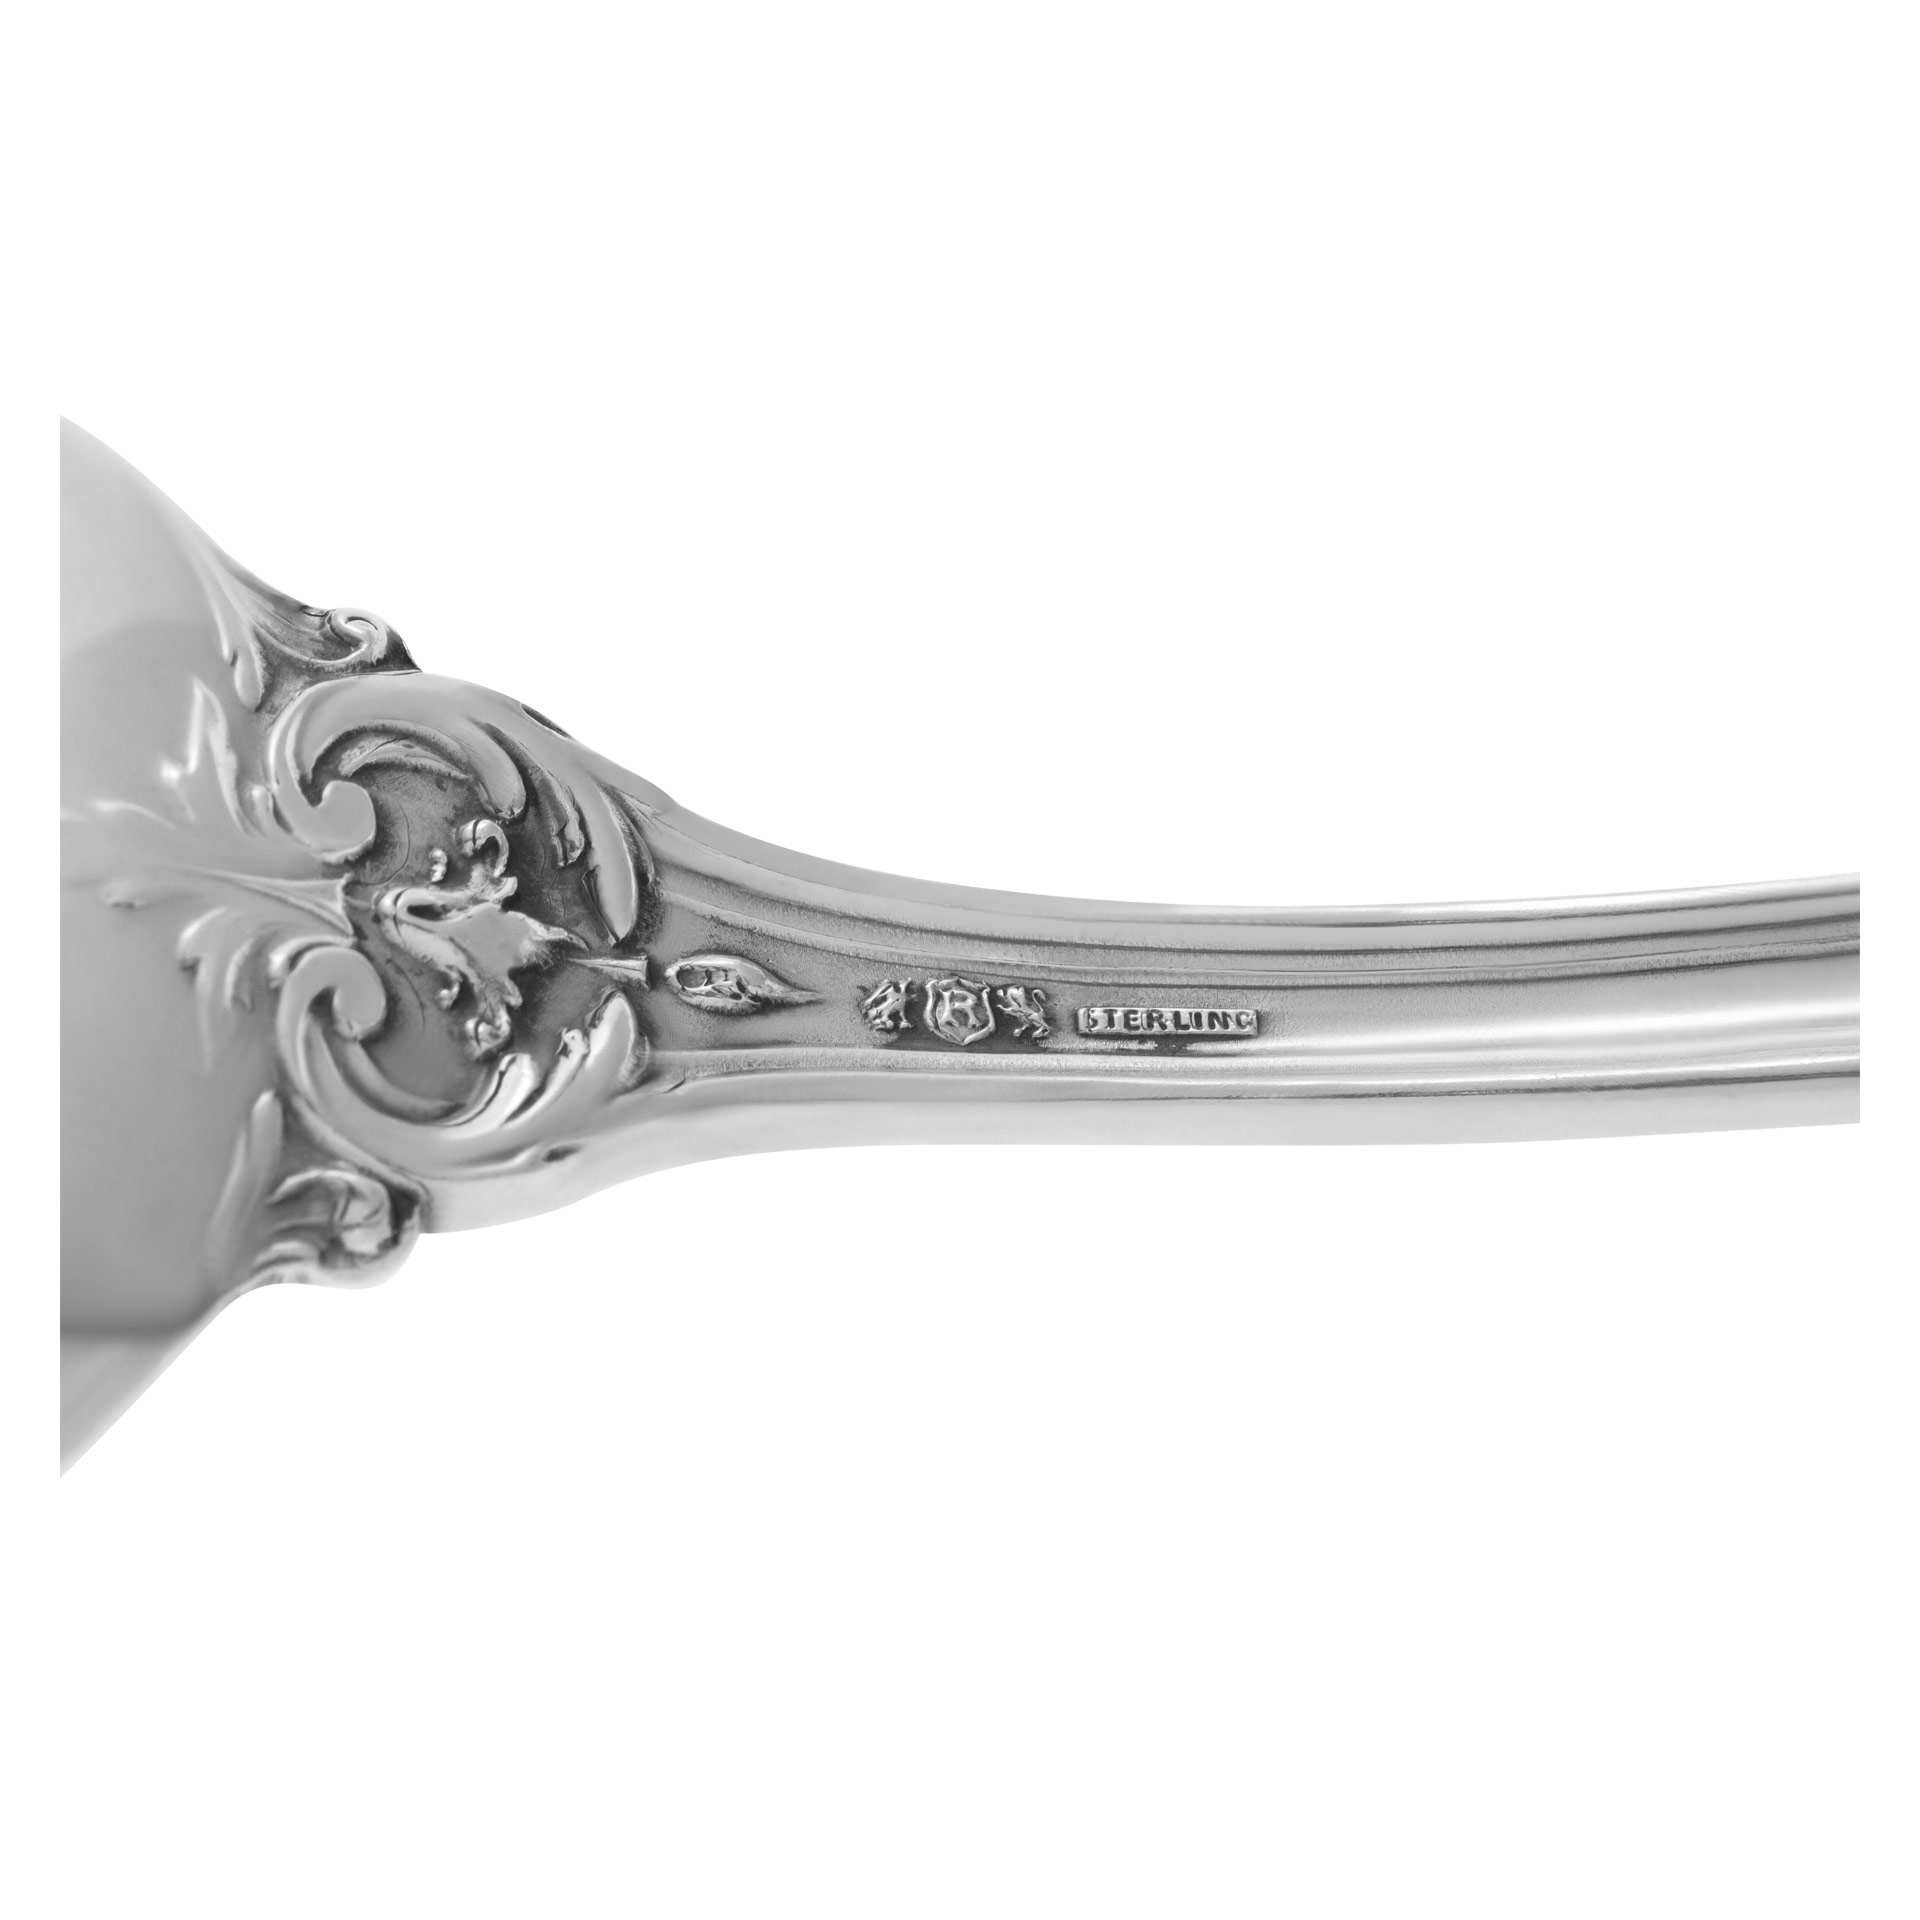 FRANCIS THE FIRST sterling silver flatware set patented in 1907 by Reed & Barton- TOTAL 58 PIECES- 4 place set for 10 (with xtras) and 5 serving pieces. image 5